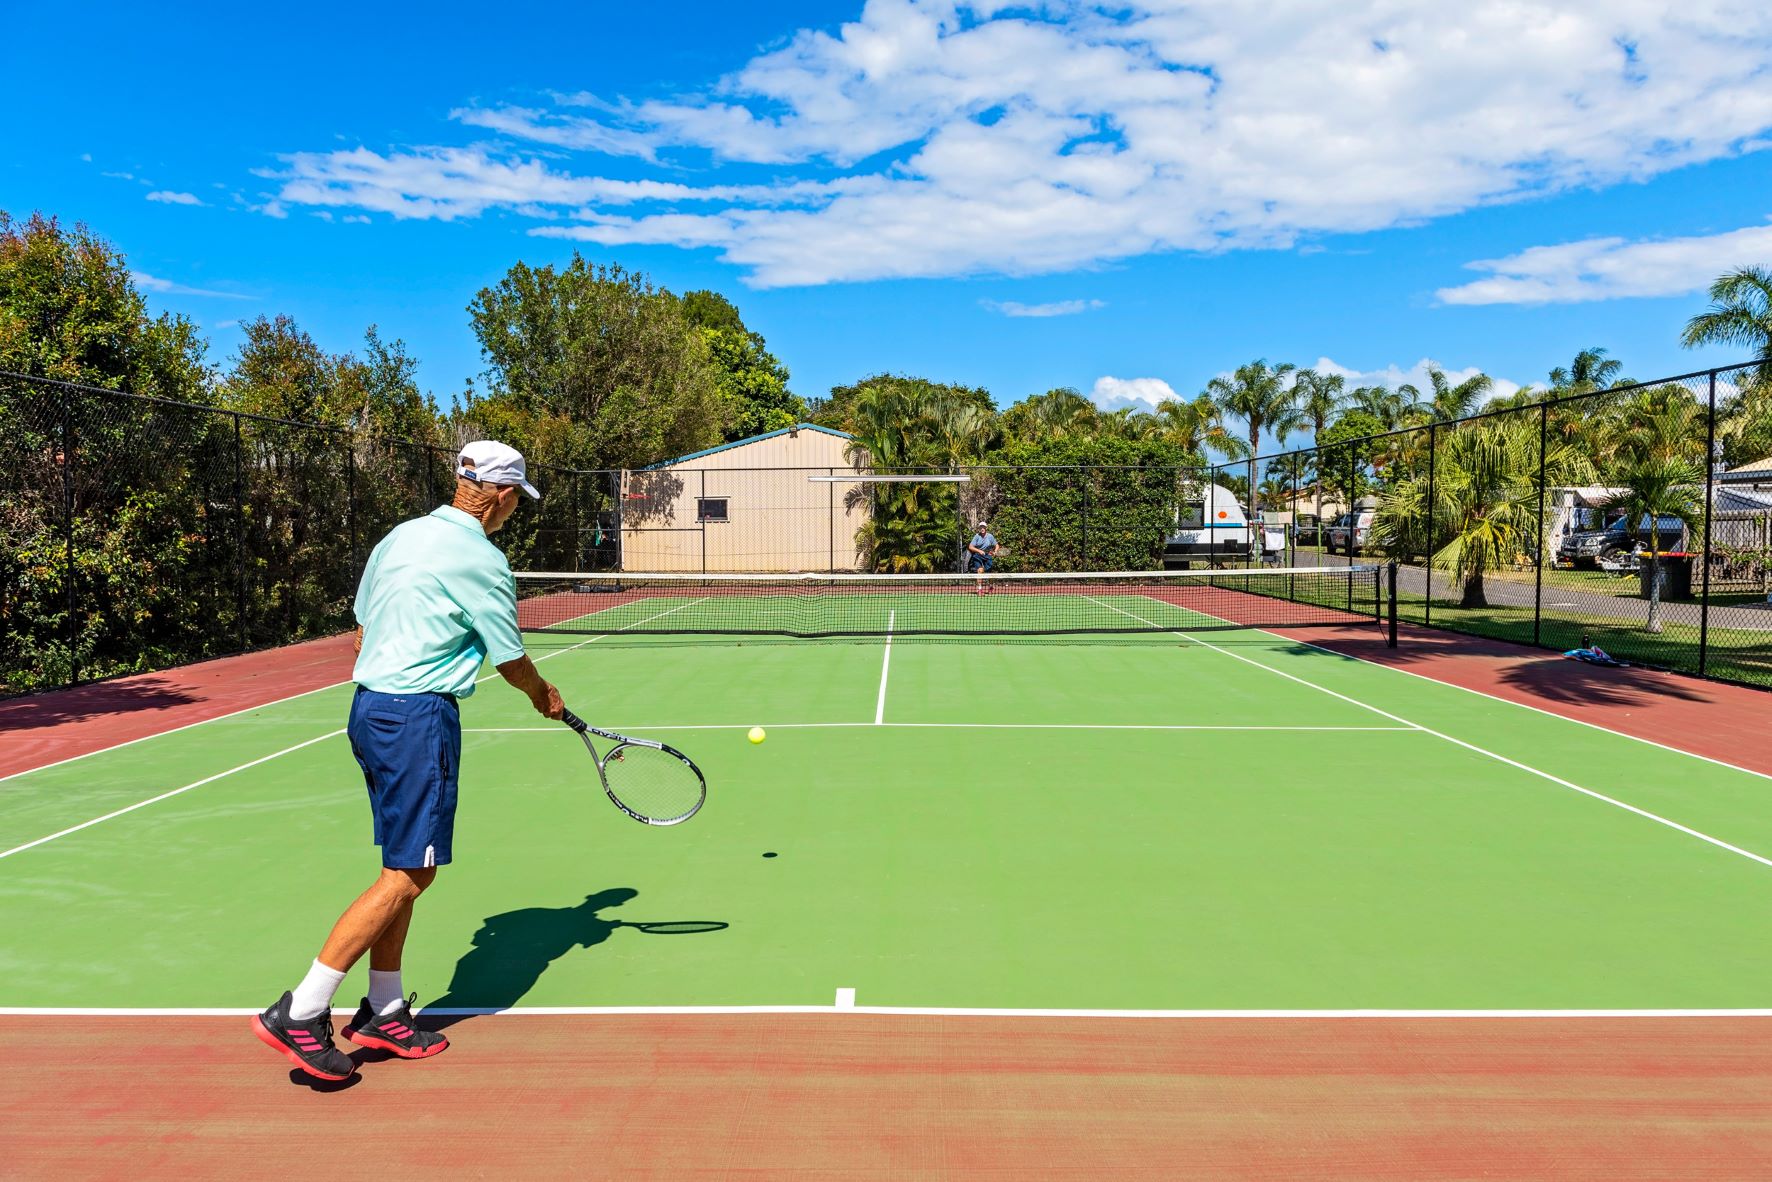 The best holiday parks in australia sports facilities tennis court